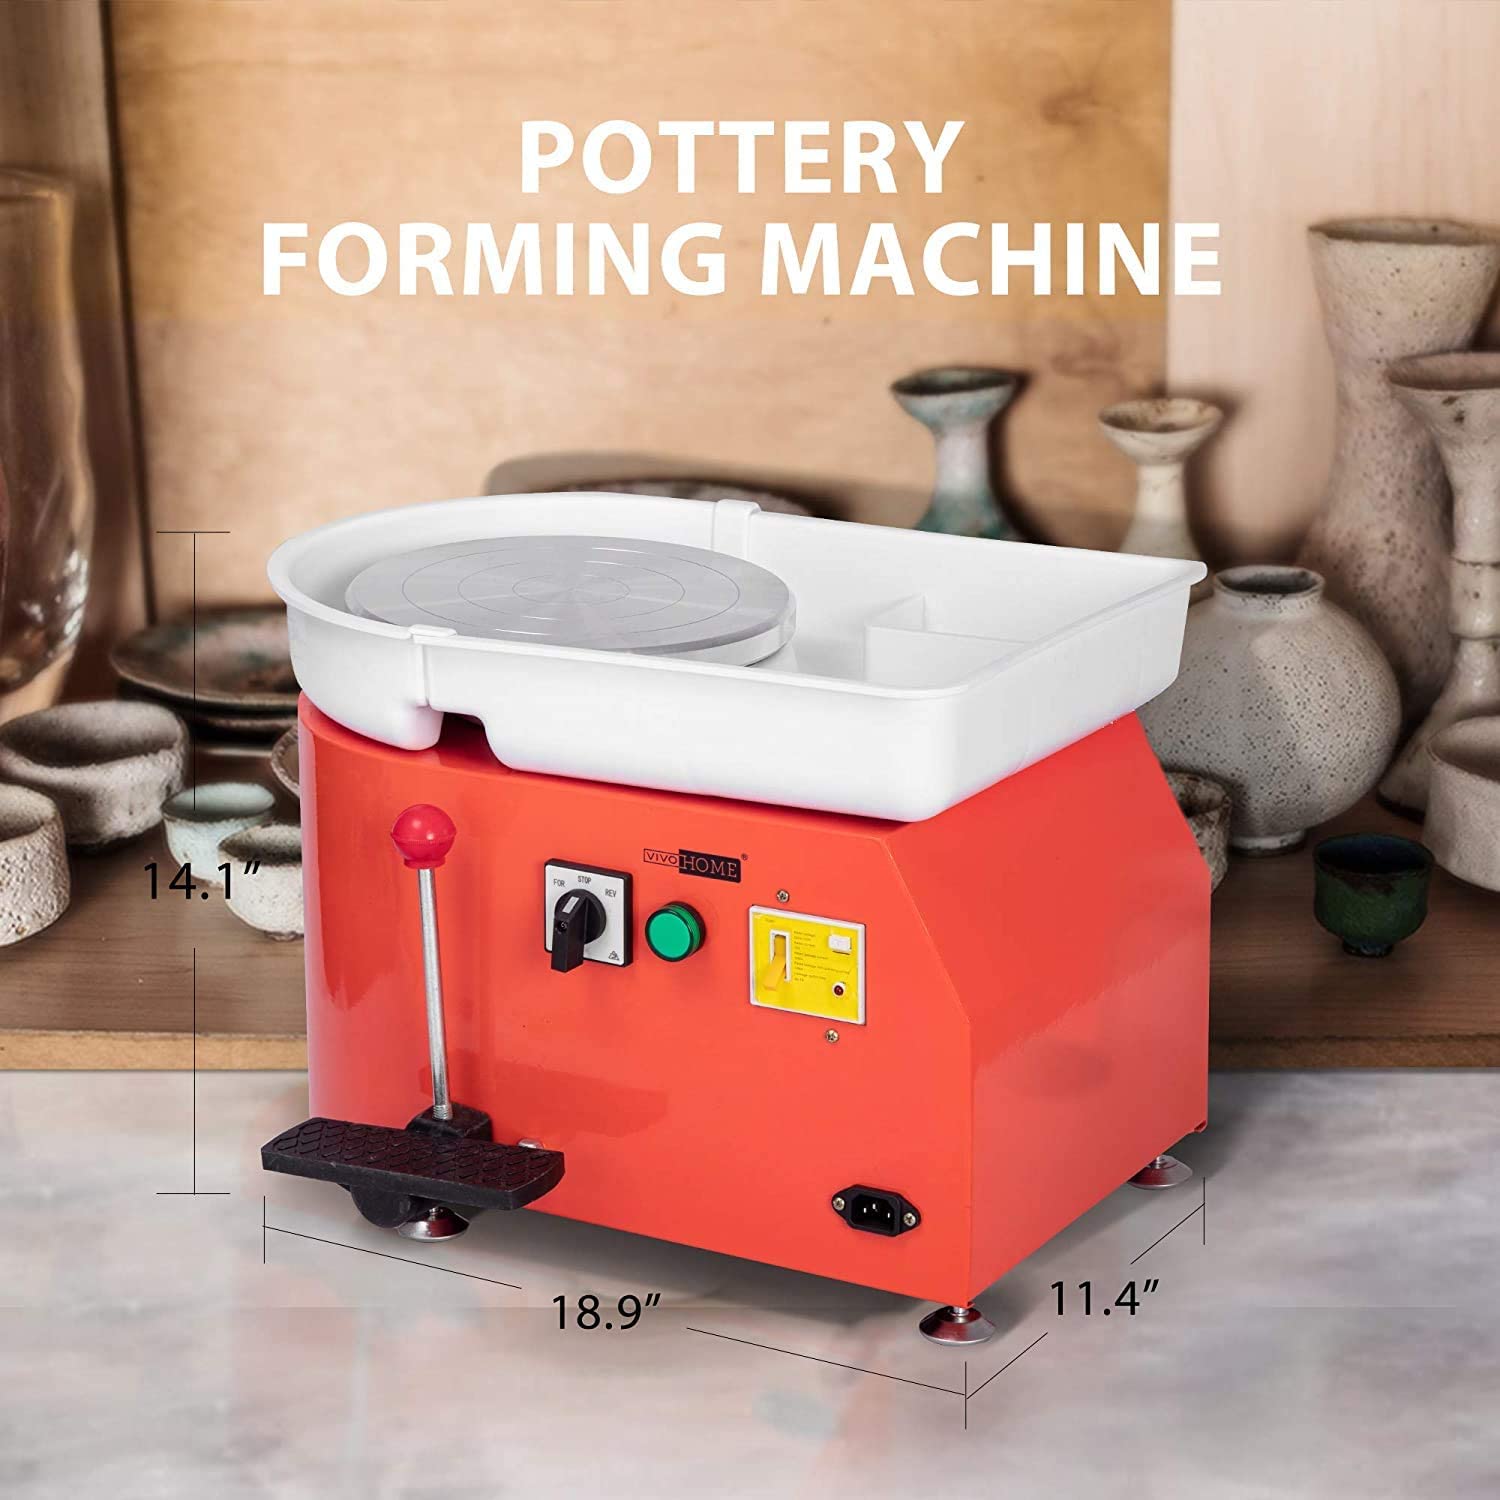 VIVOHOME 25CM Pottery Wheel Forming Machine 350W Electric DIY Clay Tool with Foot Pedal and Detachable Basin for Ceramic Work Art Craft Orange